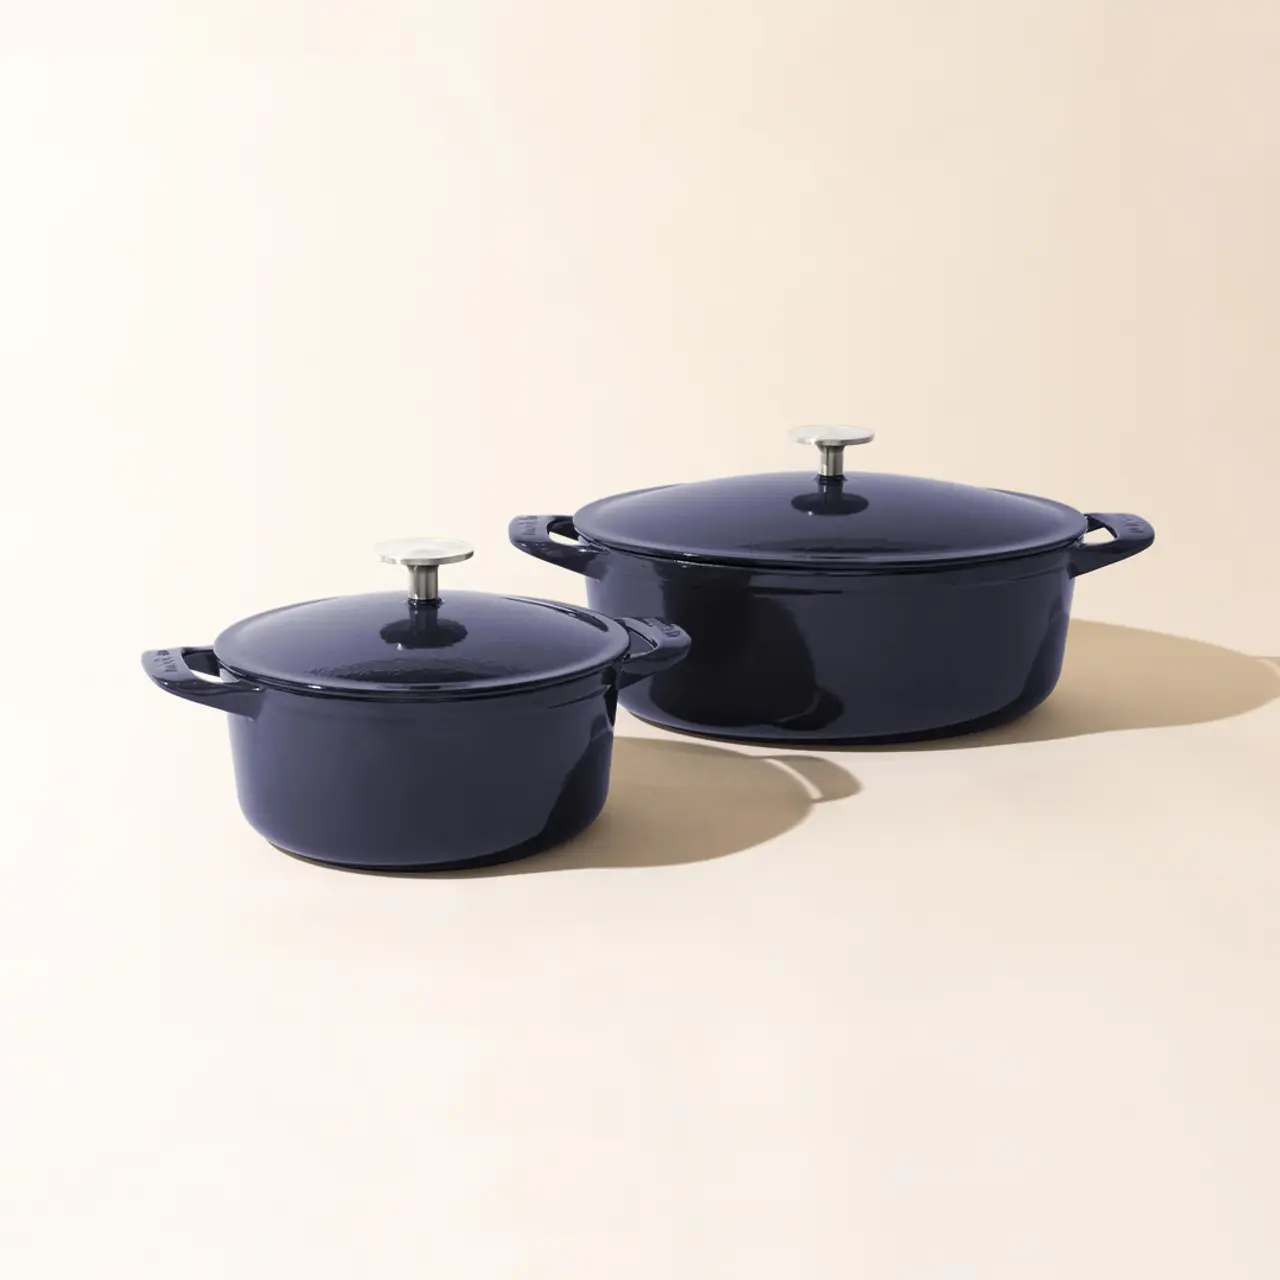 Two blue enameled cast iron pots with lids on a beige background.